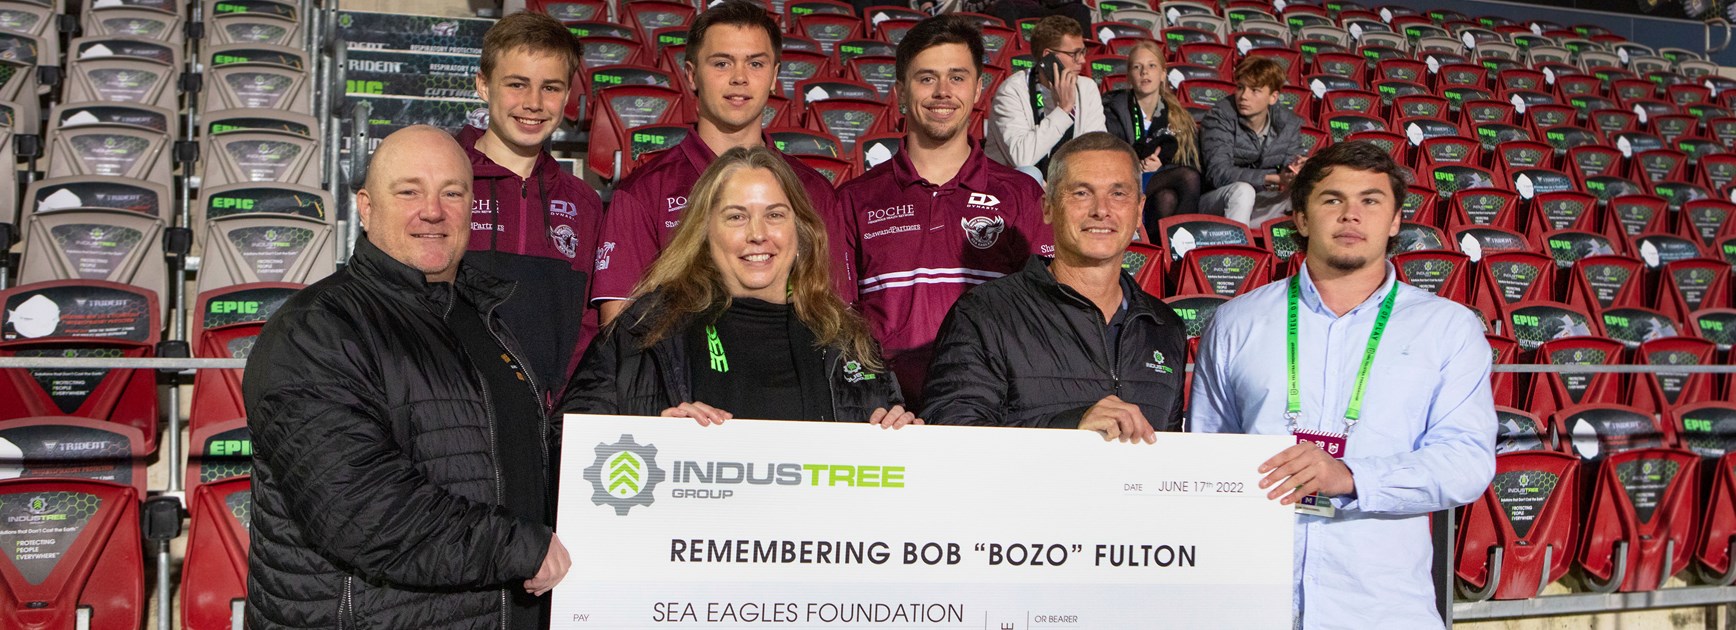 Industree Group makes another generous donation to Sea Eagles Pathways